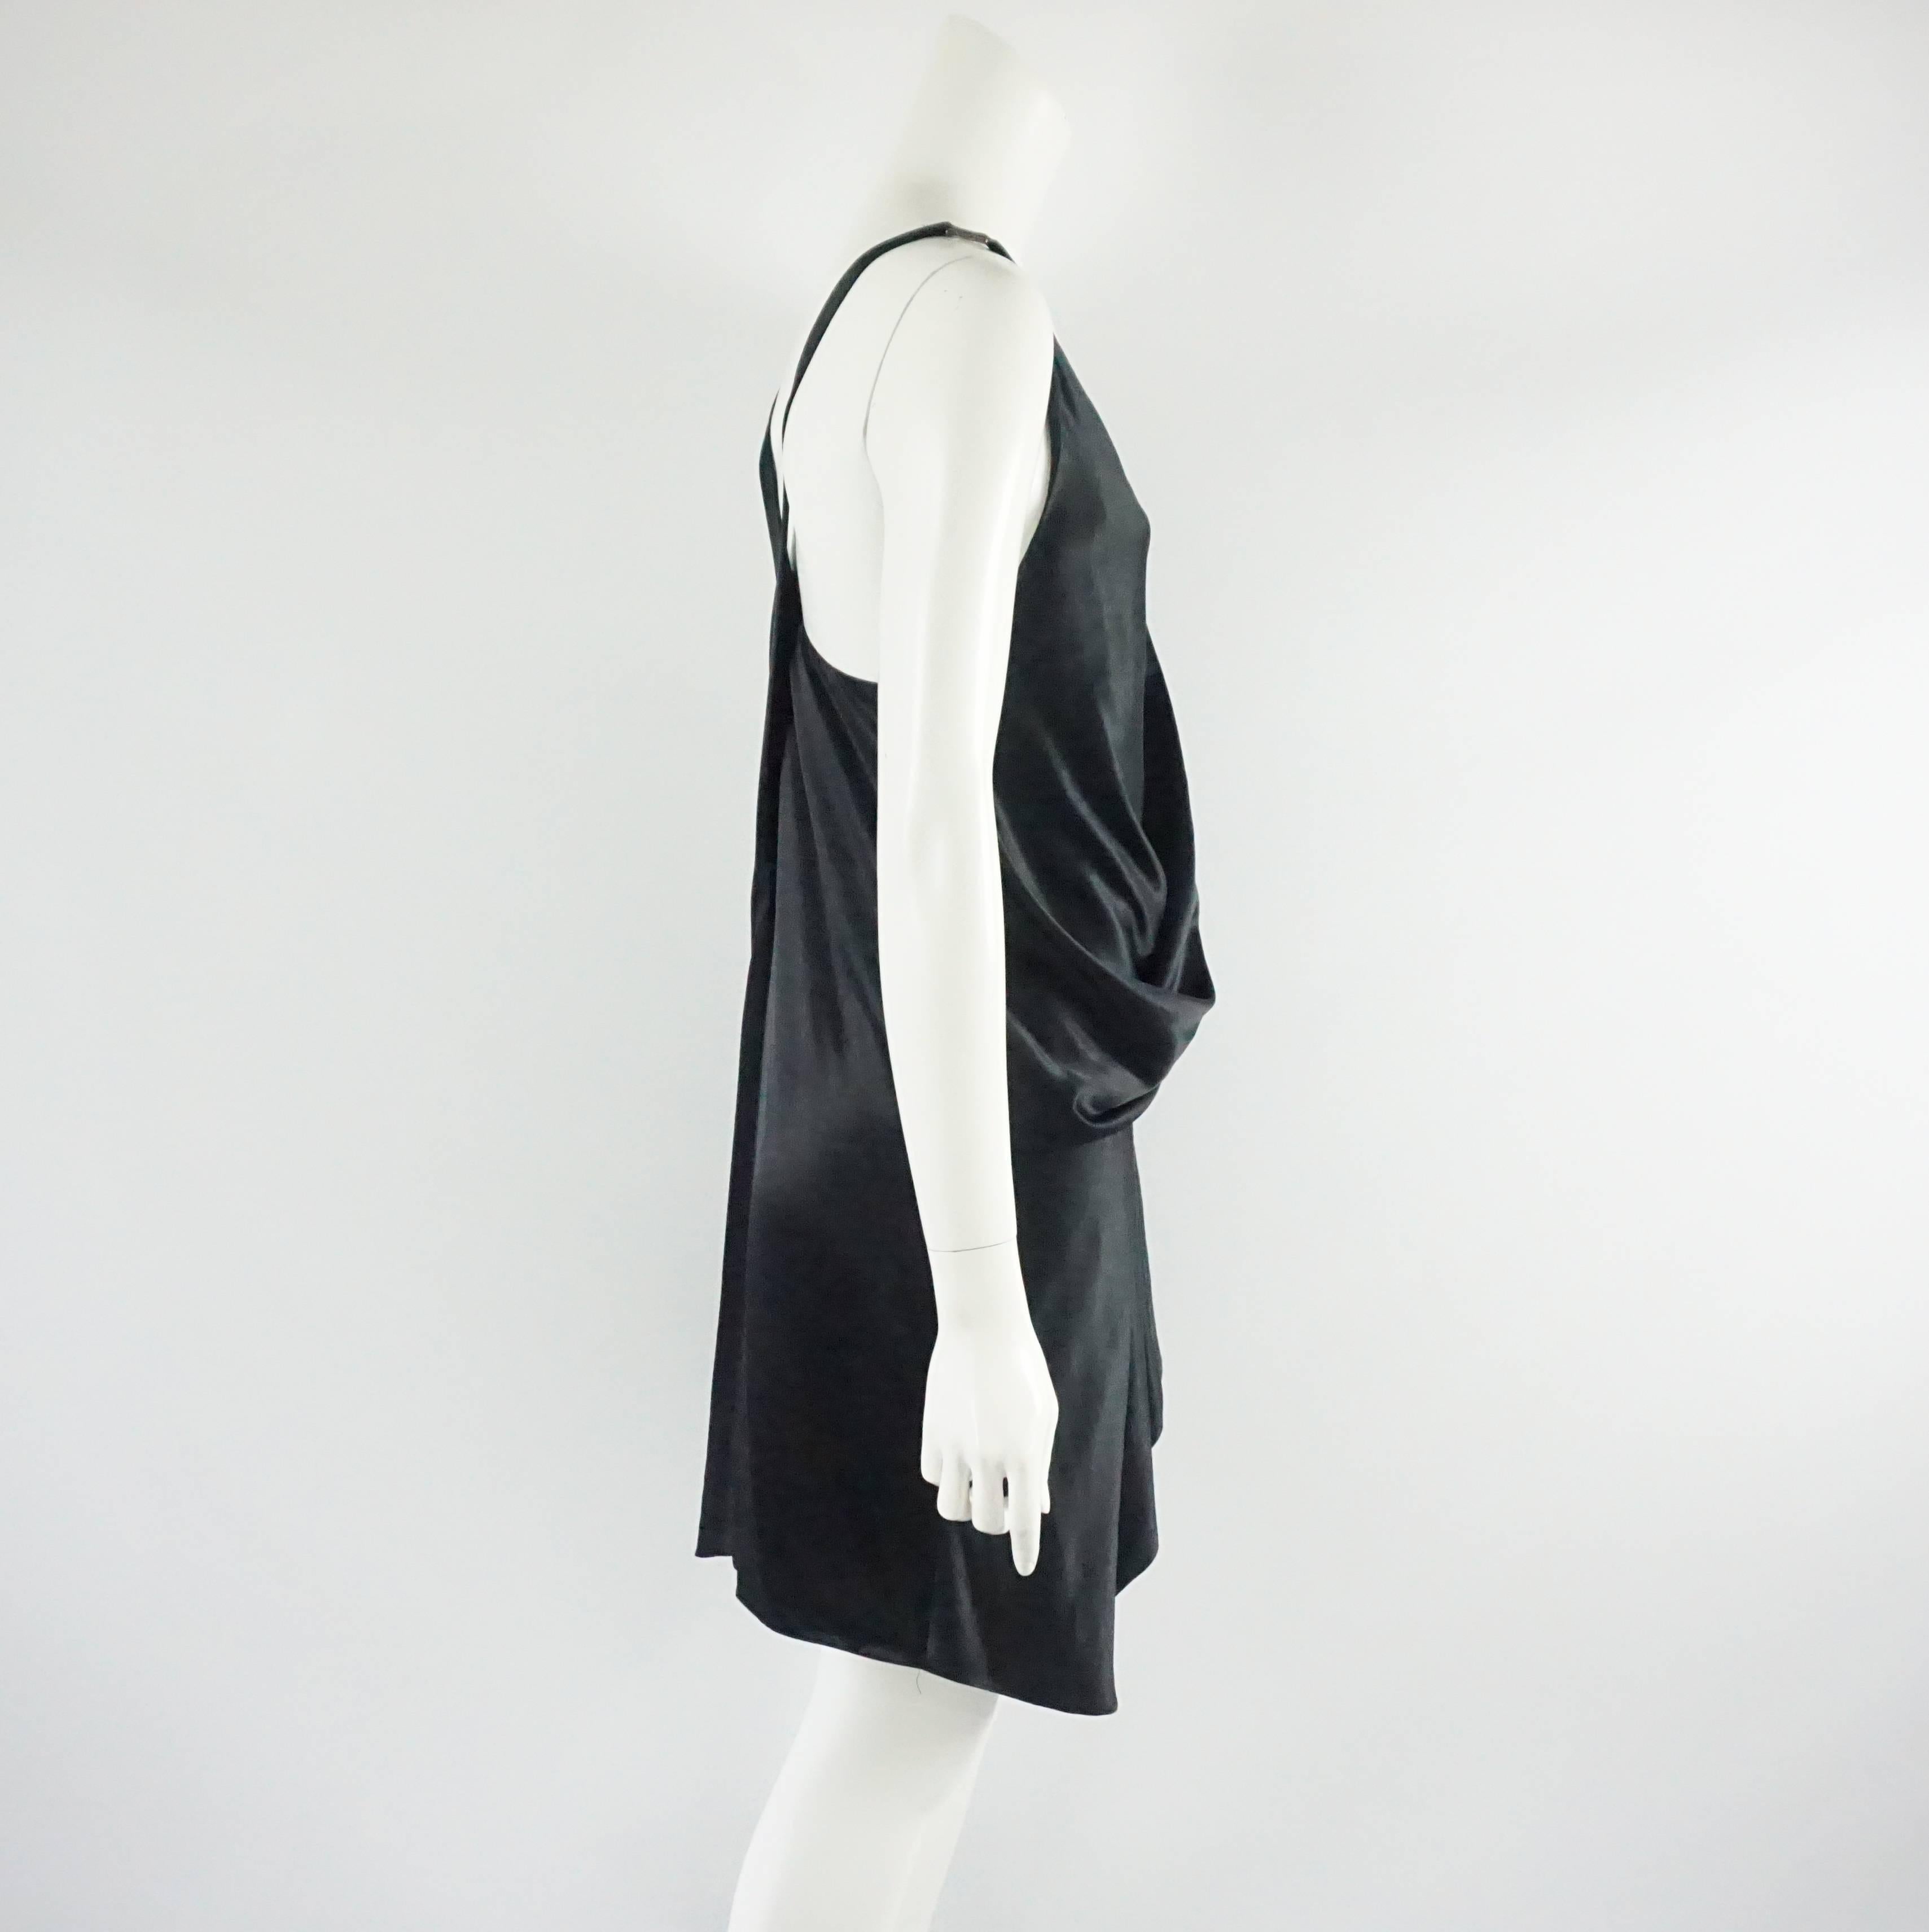 Helmut Lang Black Satin Dress with Crossing Straps - 6. This Helmut Lang dress is black satin. The straps cross each other in the back. In the front, there is a deep v-neck and the sides cross over each other leaving a billowy appearance. The skirt